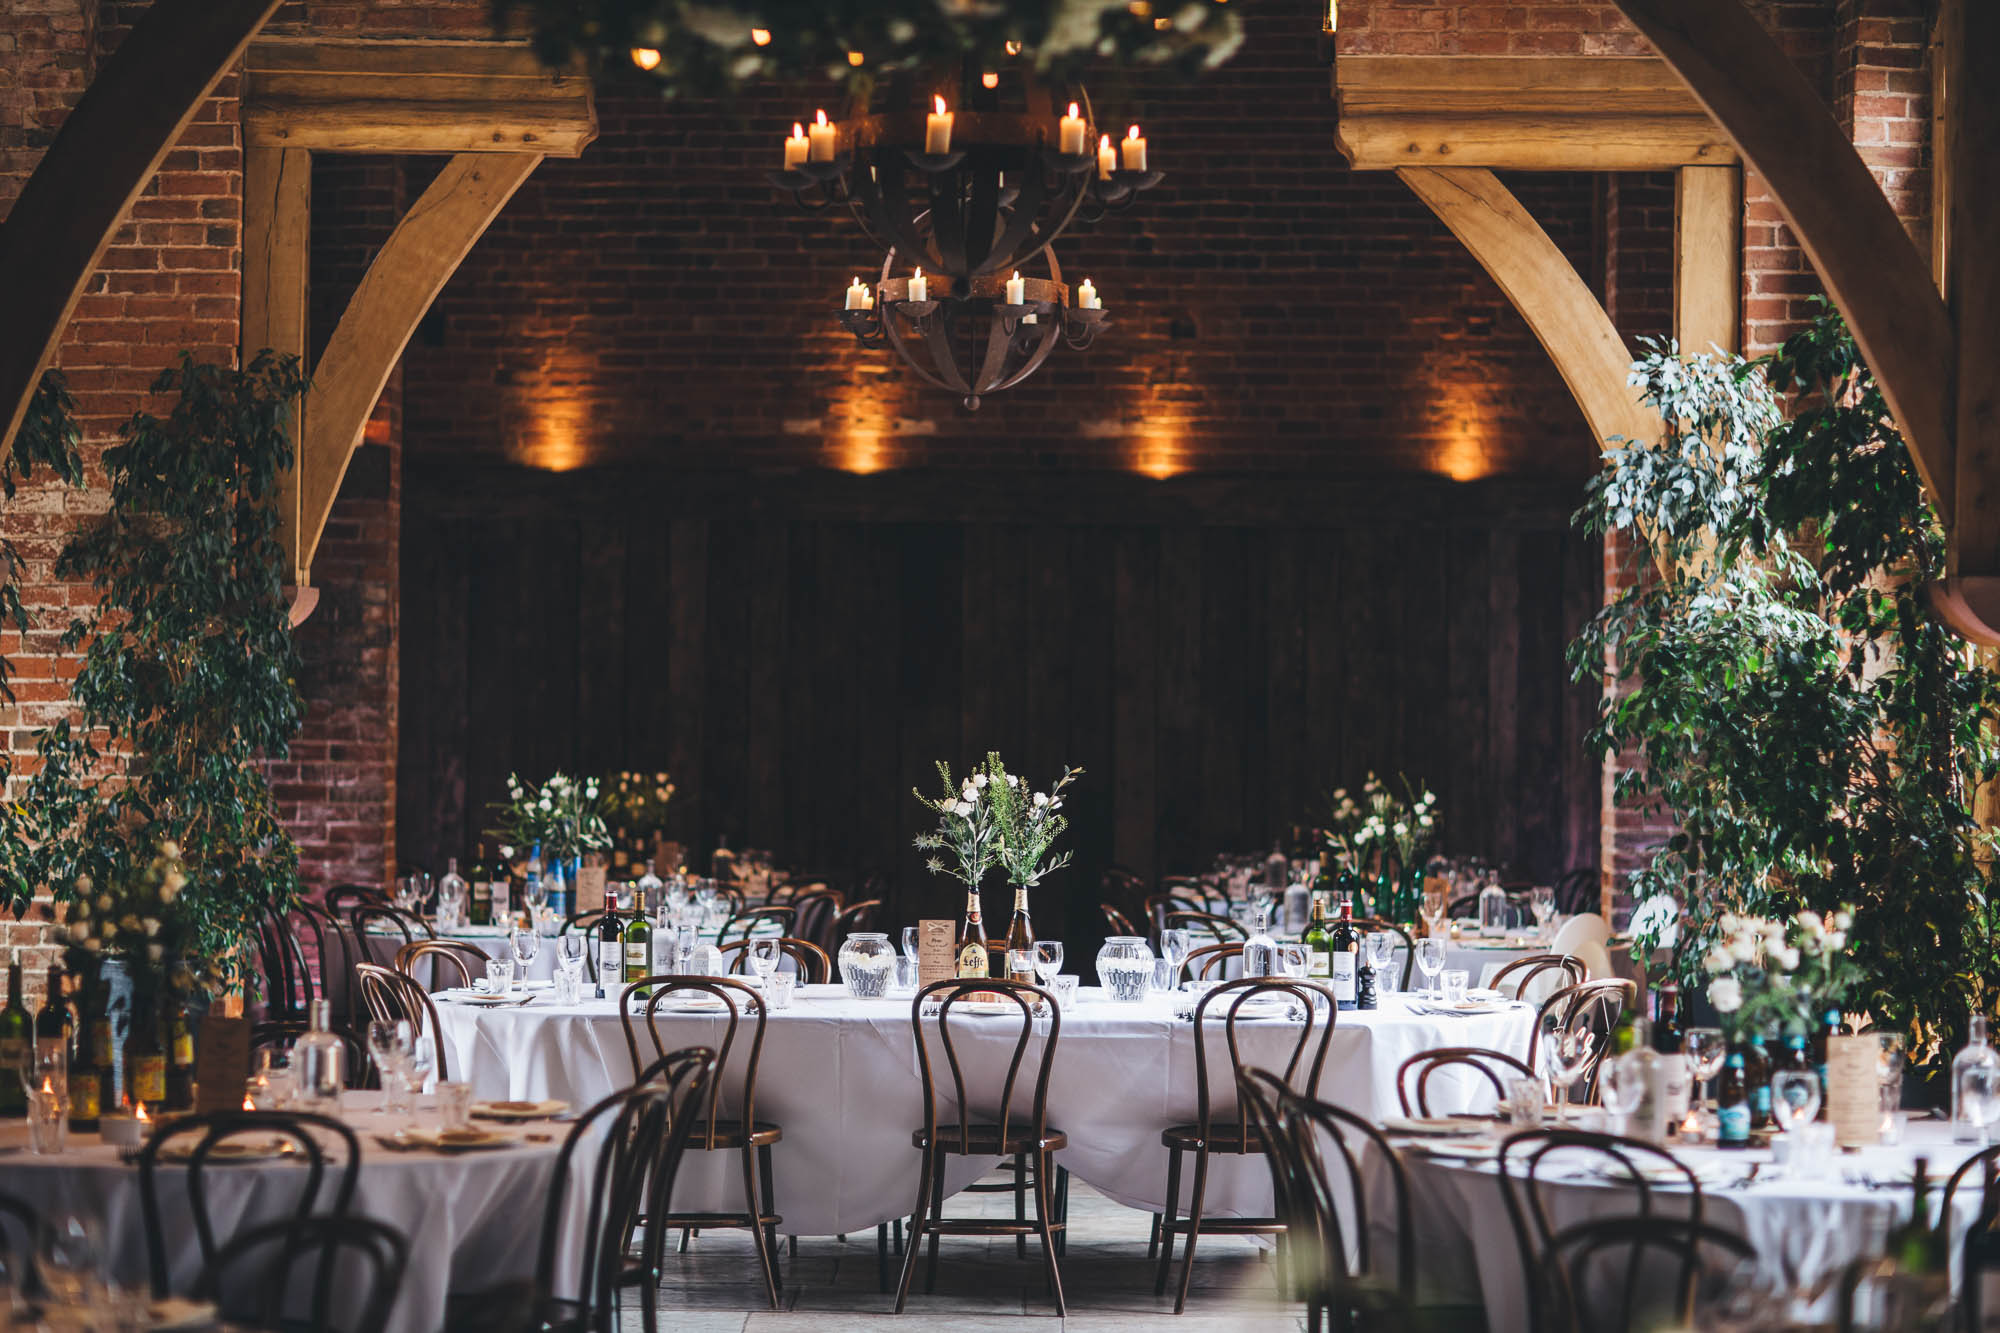 Wedding reception in rustic red brick barn with candlelight